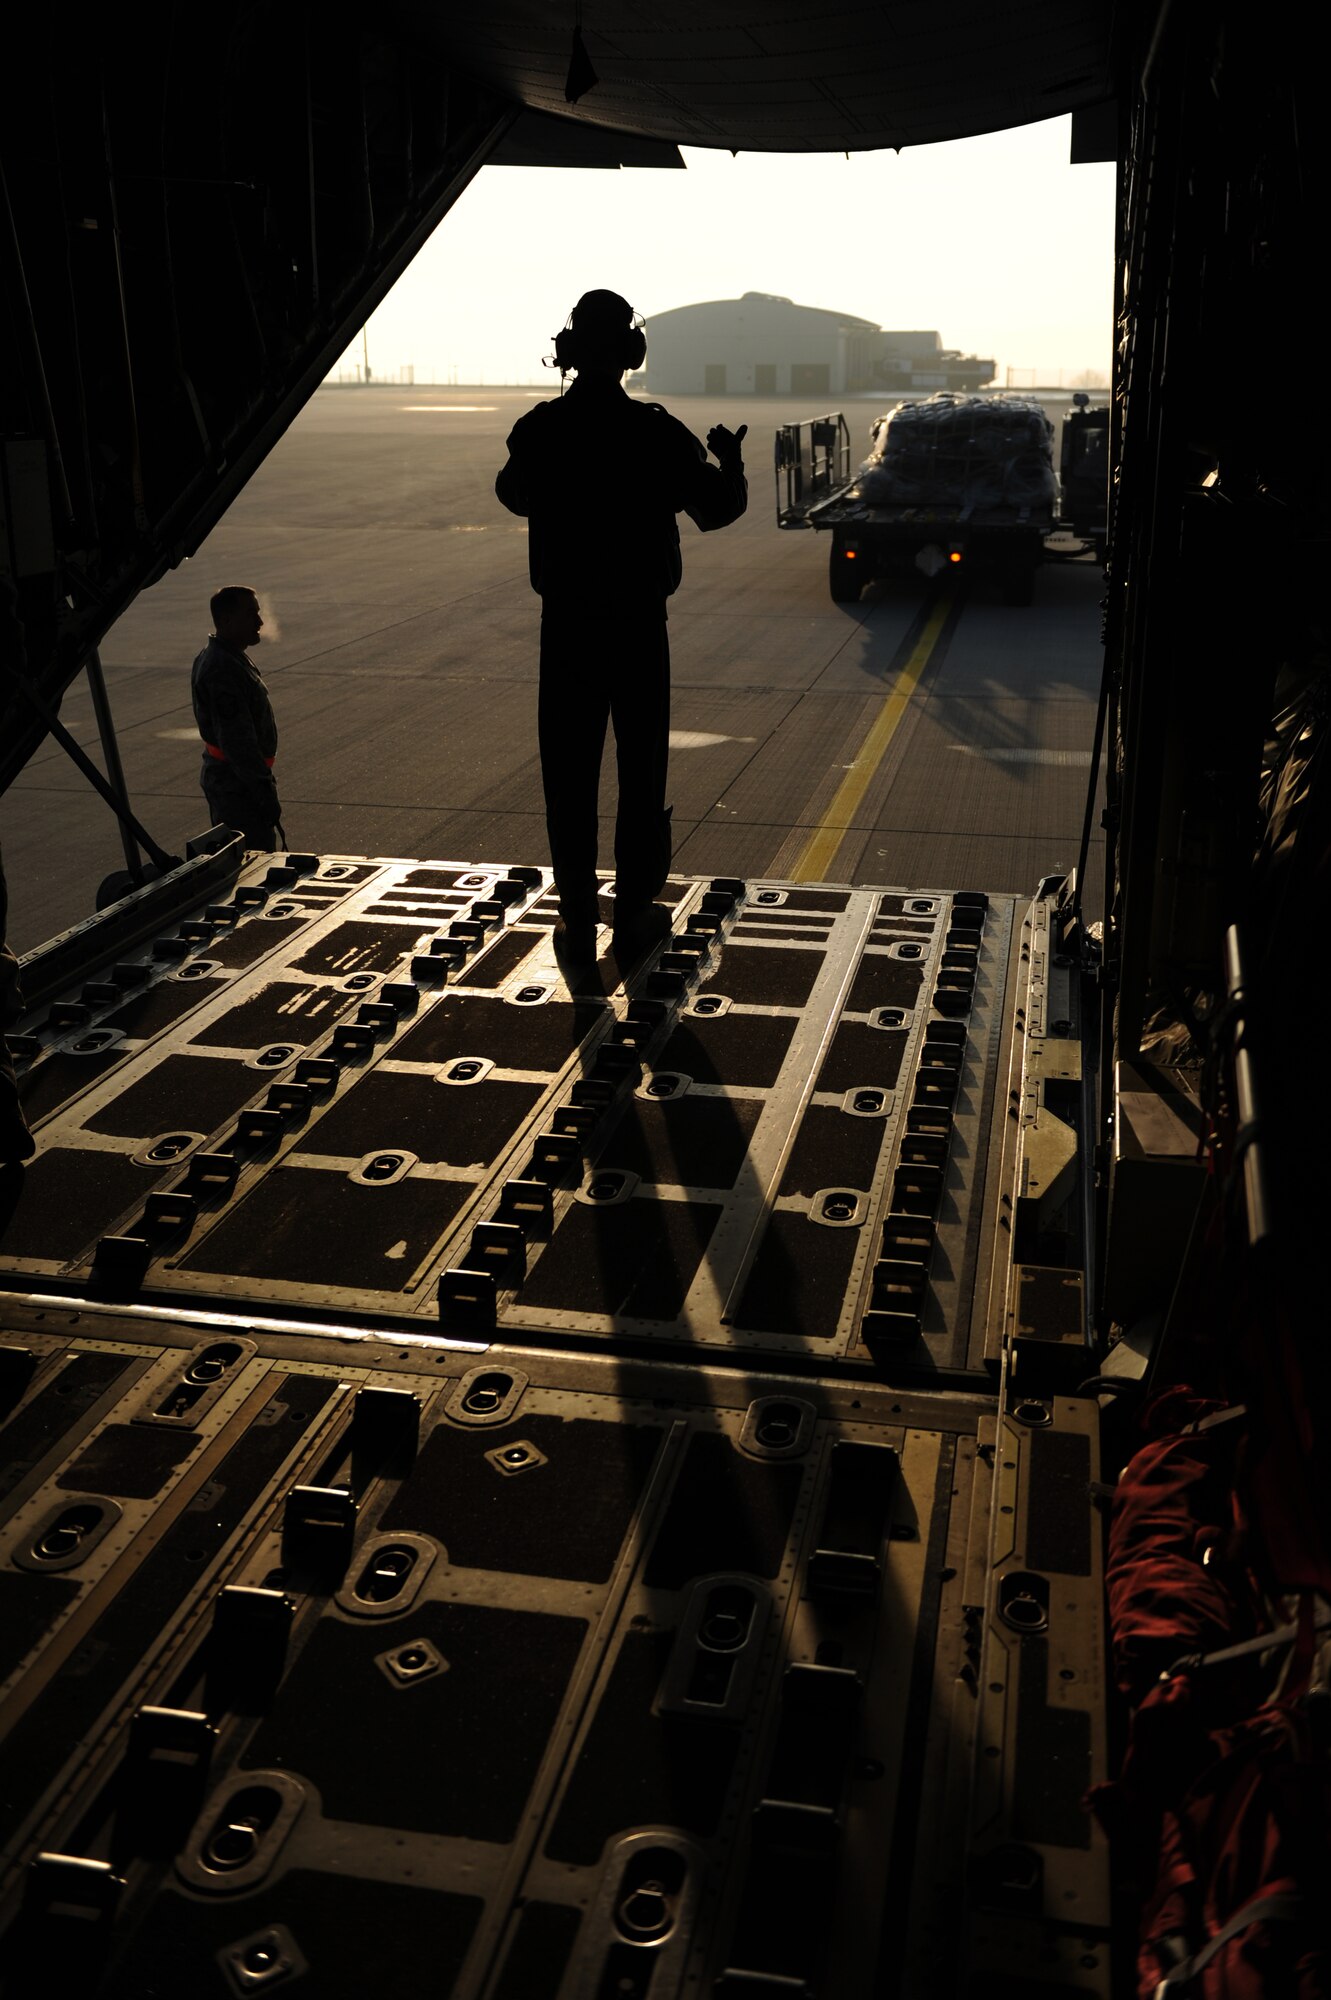 SPANGDAHLEM AIR BASE, Germany – An Airman guides a K-loader to the ramp of a C-130 Hercules here Feb. 27 to load cargo for a flight to Turkey in support of Anatolian Falcon 2012, a weapons training deployment that includes interdiction, attack, air superiority, defense suppression, airlift, air refueling and reconnaissance. More than 250 Airmen from the 52nd Fighter Wing will participate in the exercise hosted at Turkish air force’s Konya Air Base. The U.S. and Turkish air forces will work together and improve both nations’ combat readiness through tactical training during the exercise. (U.S. Air Force photo by Airman 1st Class Matthew B. Fredericks/Released)